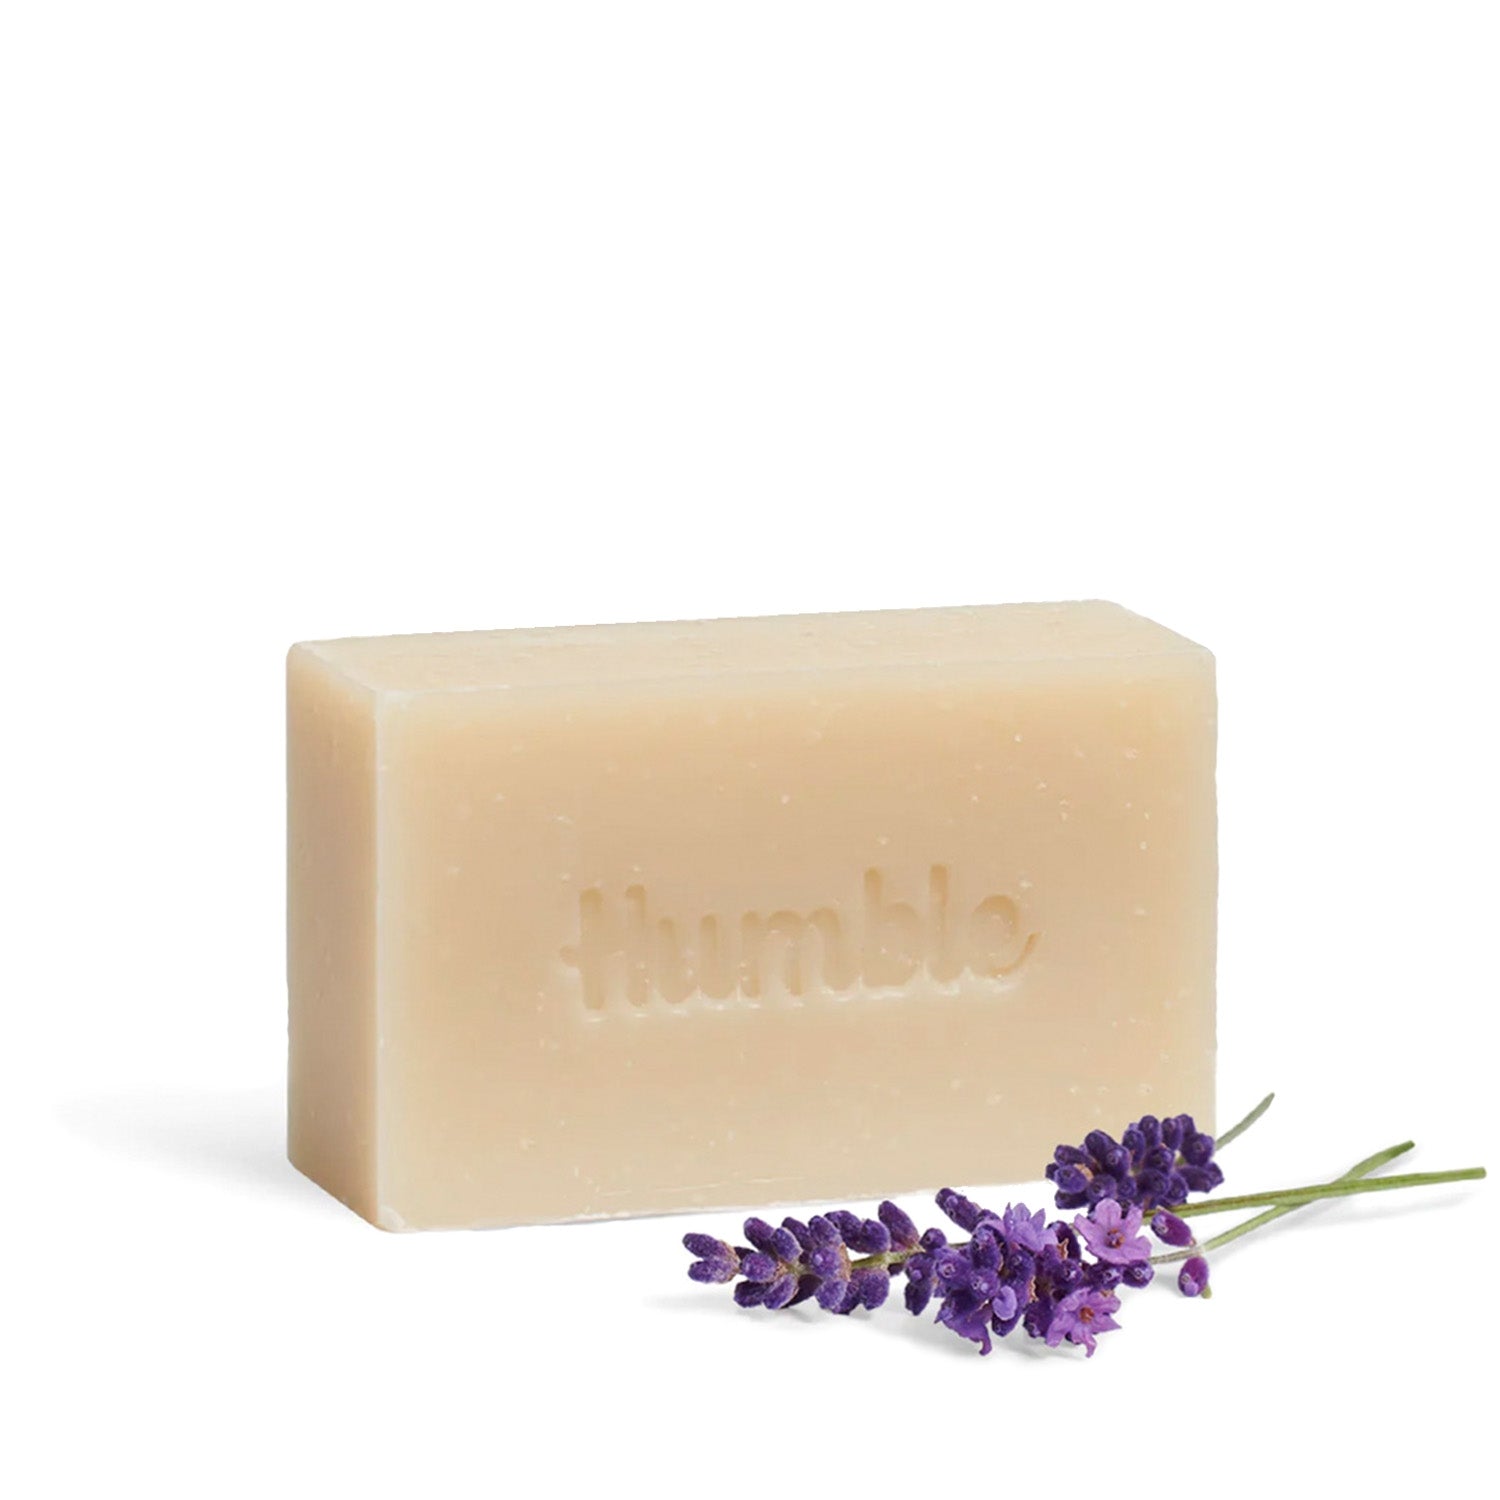 Humble Eco Friendly Cleansing Bar - Mountain Lavender